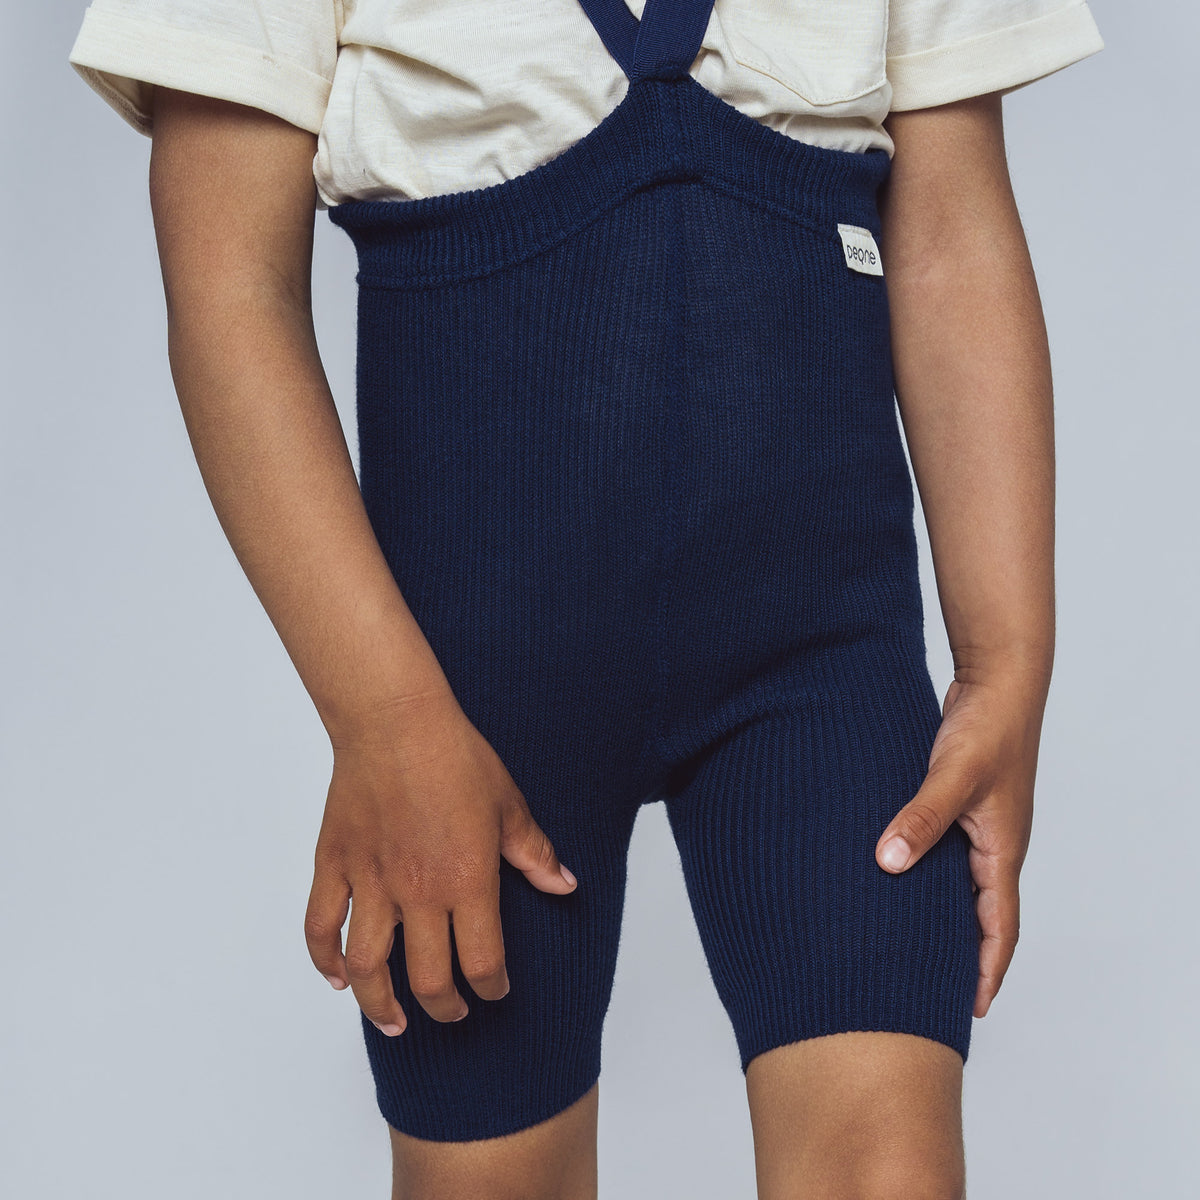 Short Tights with Braces - Navy Blue